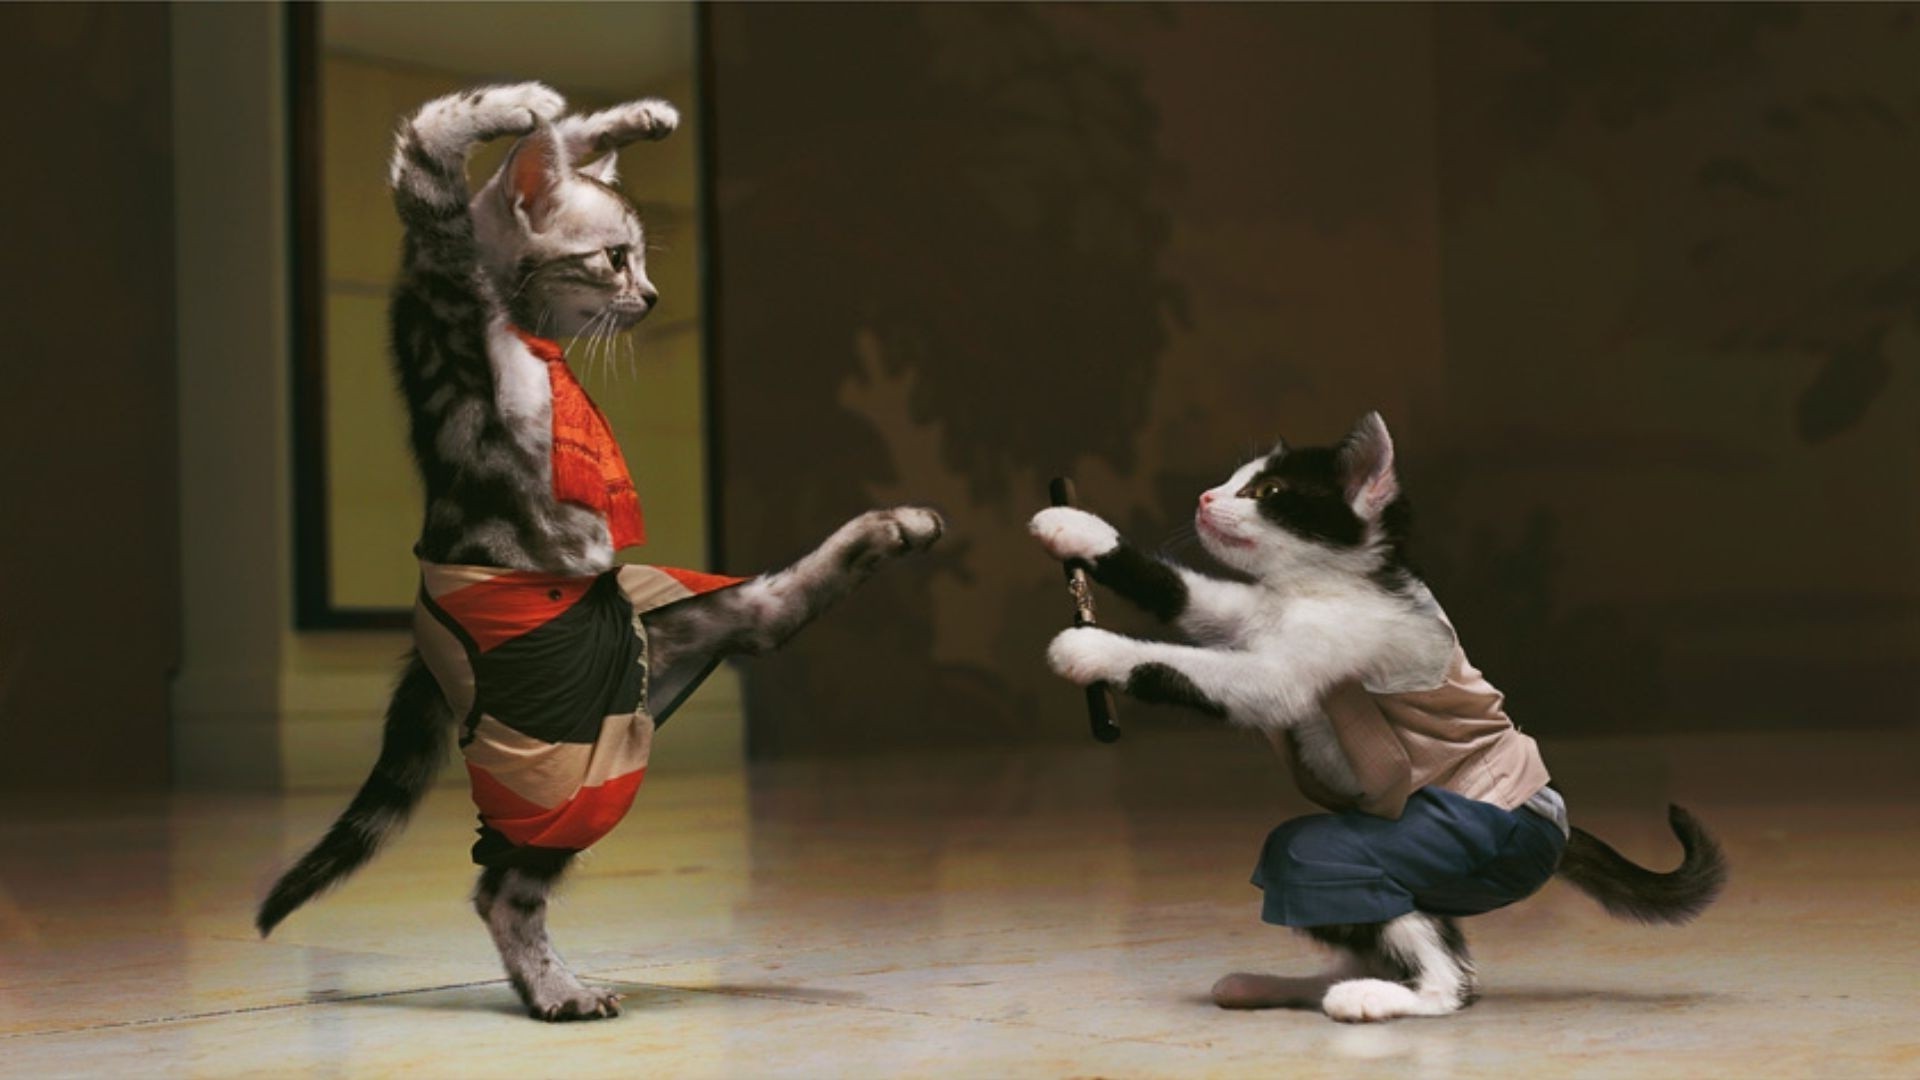 1920x1080 ... cats kung fu wallpapers hd desktop and mobile backgrounds ...